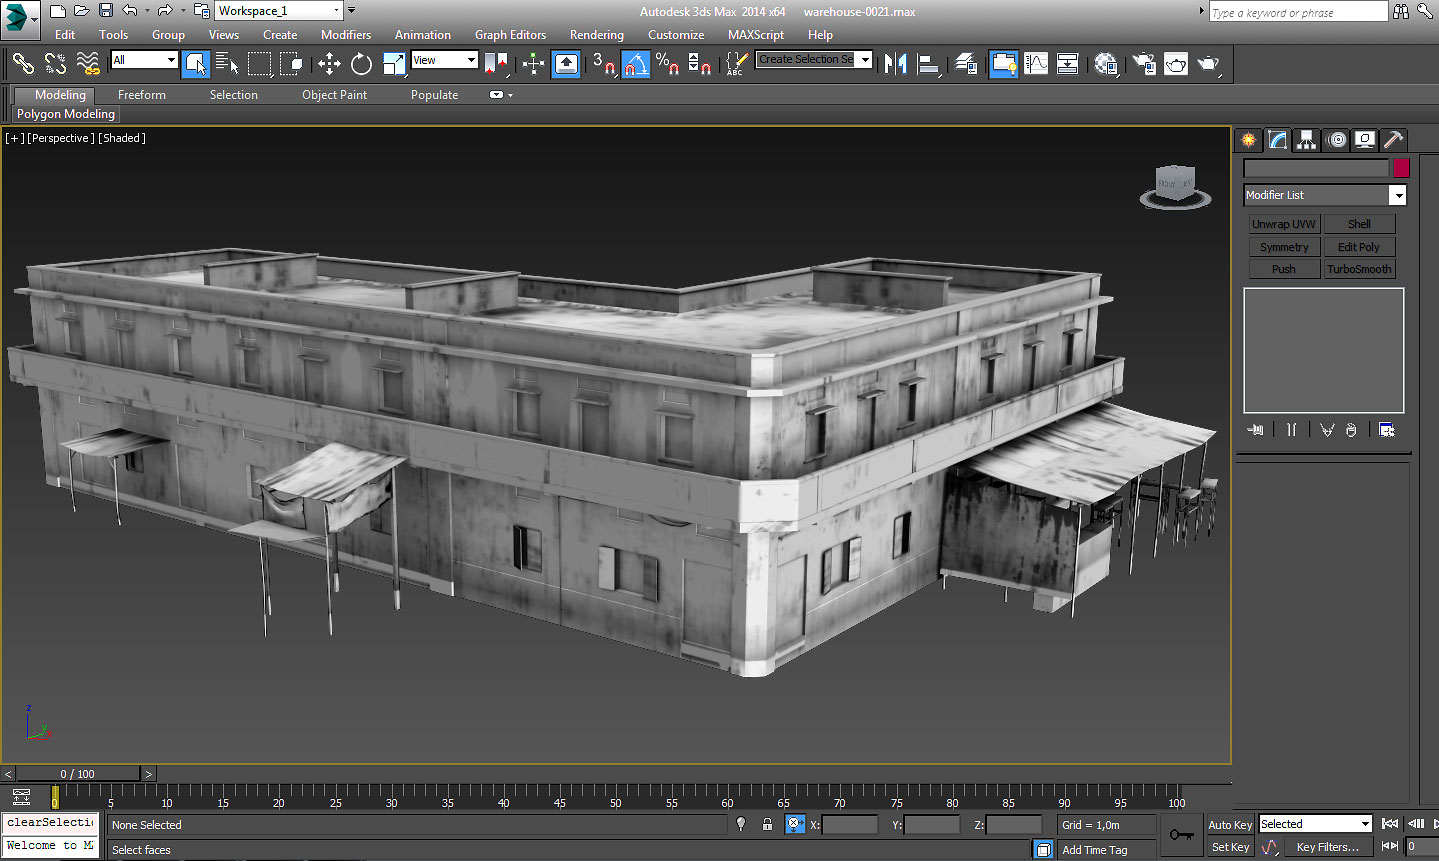 Creating the Kismayo-warehouse-0021 model in Autodesk 3ds Max.